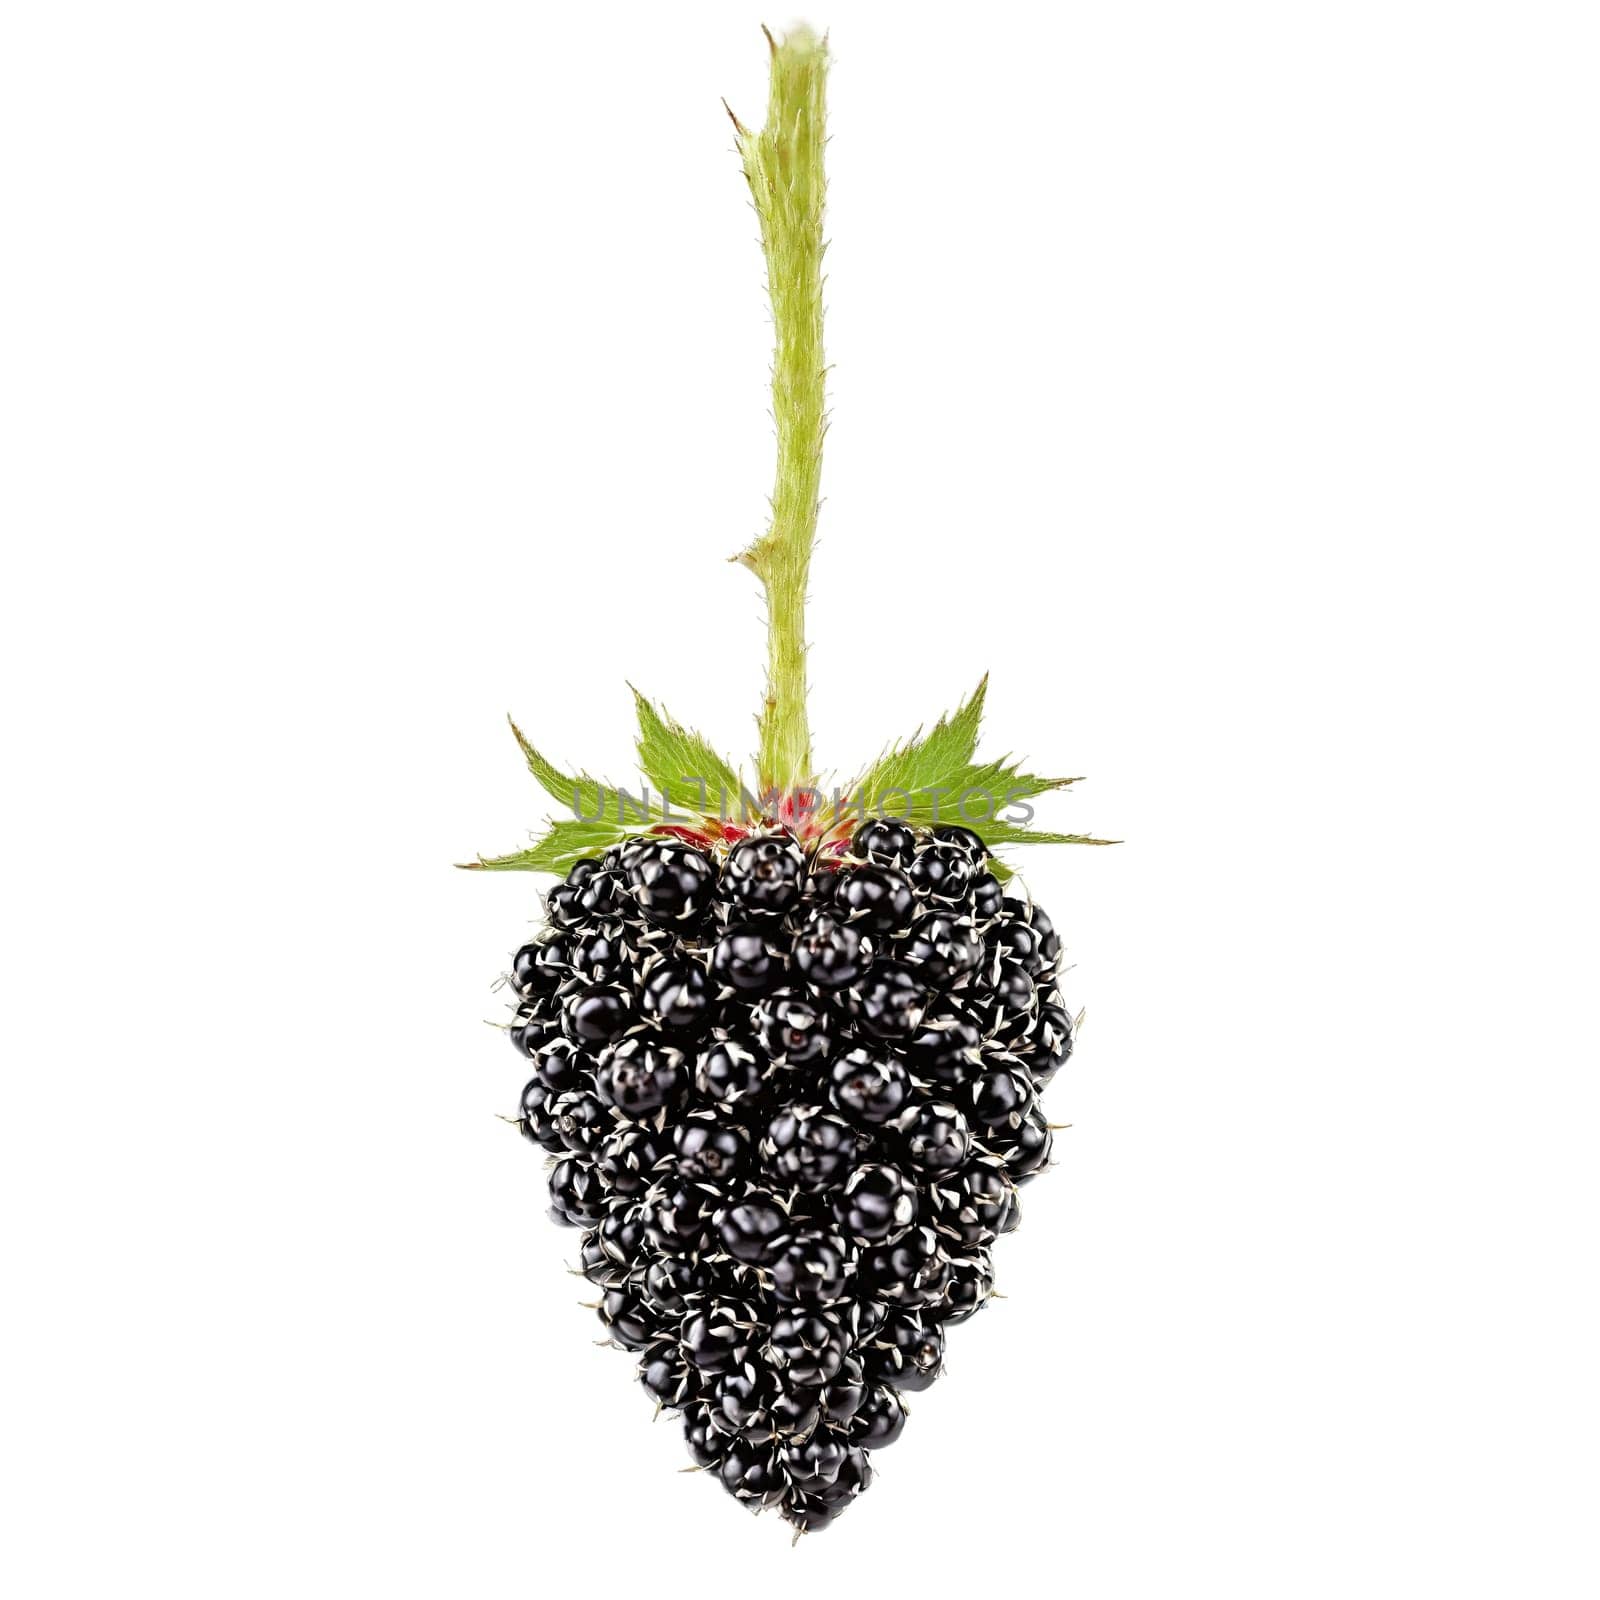 Blackberry with thorny stem and plump berries in dynamic arrangement Food and culinary concept. Food isolated on transparent background.